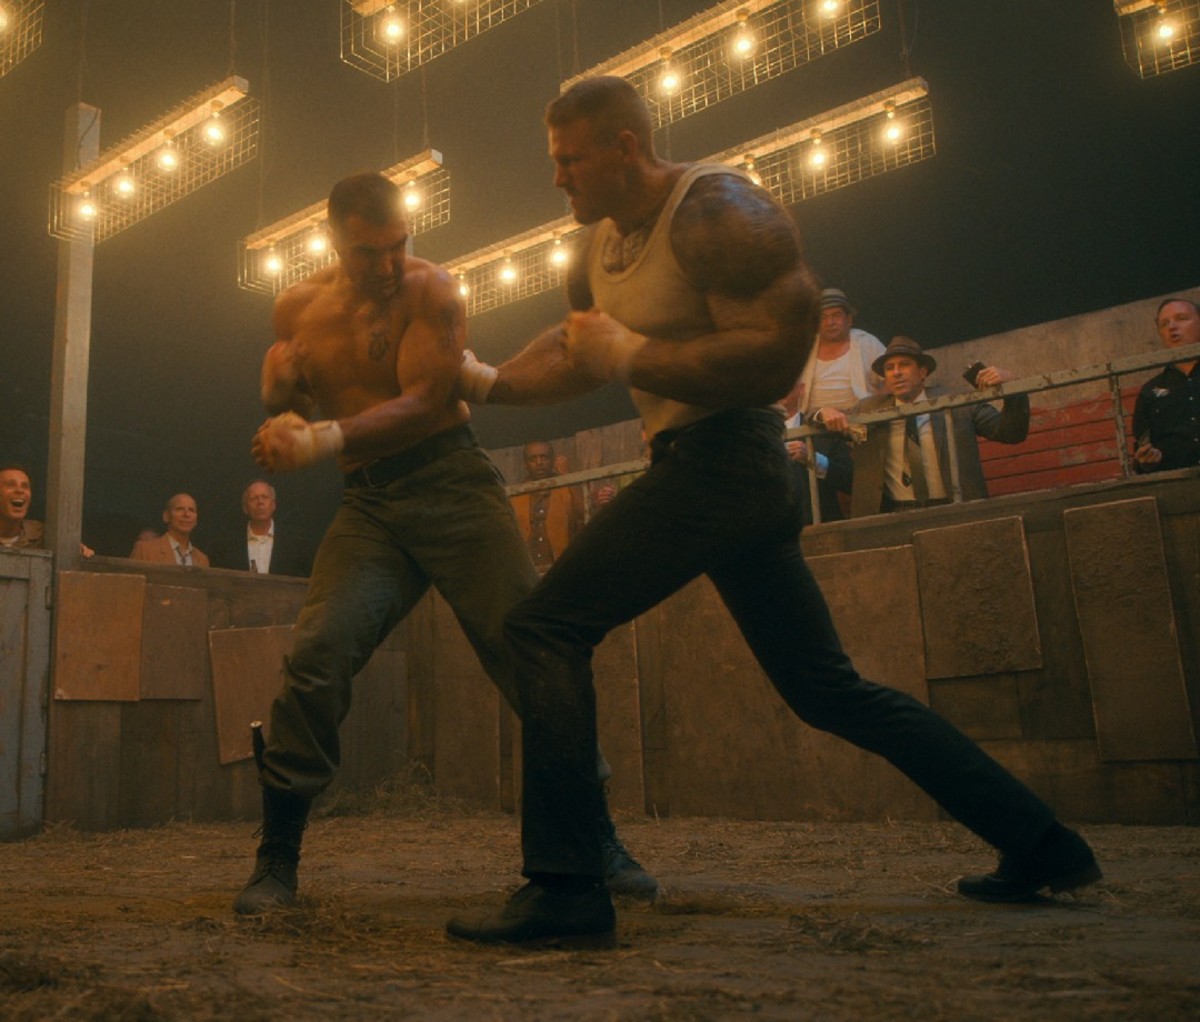 Umbrella Academy star Tom Hopper fights an opponent with spectators